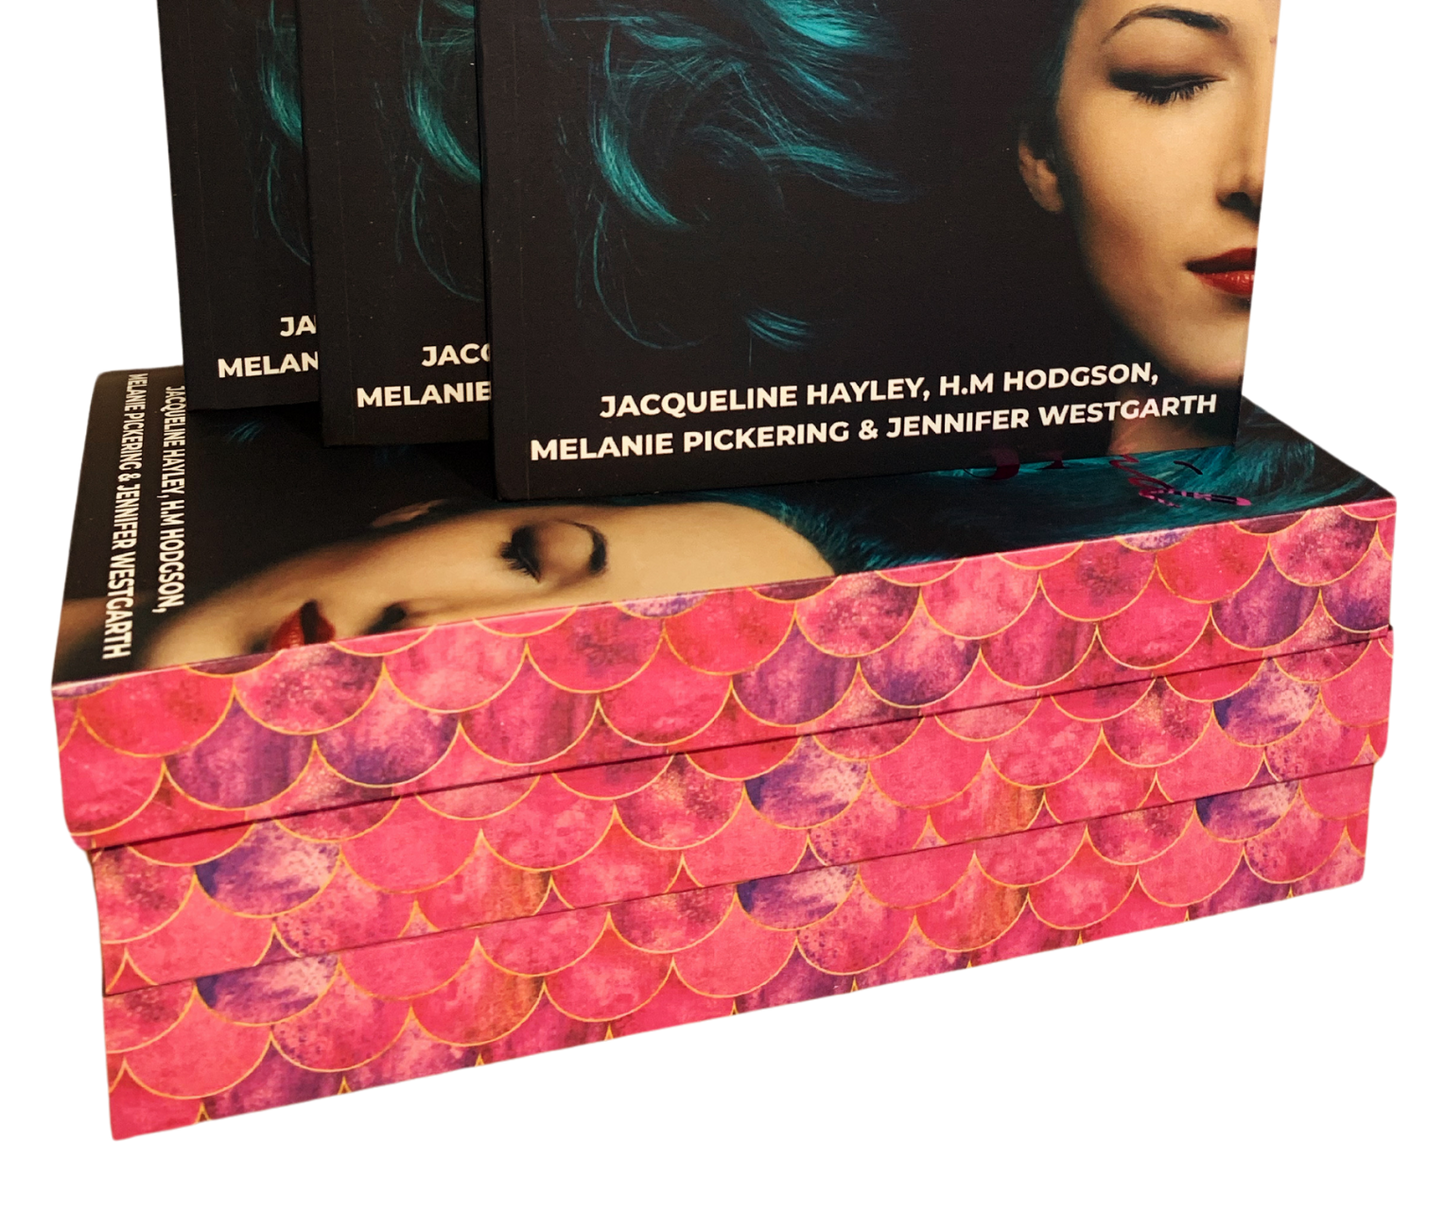 Mermaid Kisses Special Edition Paperback